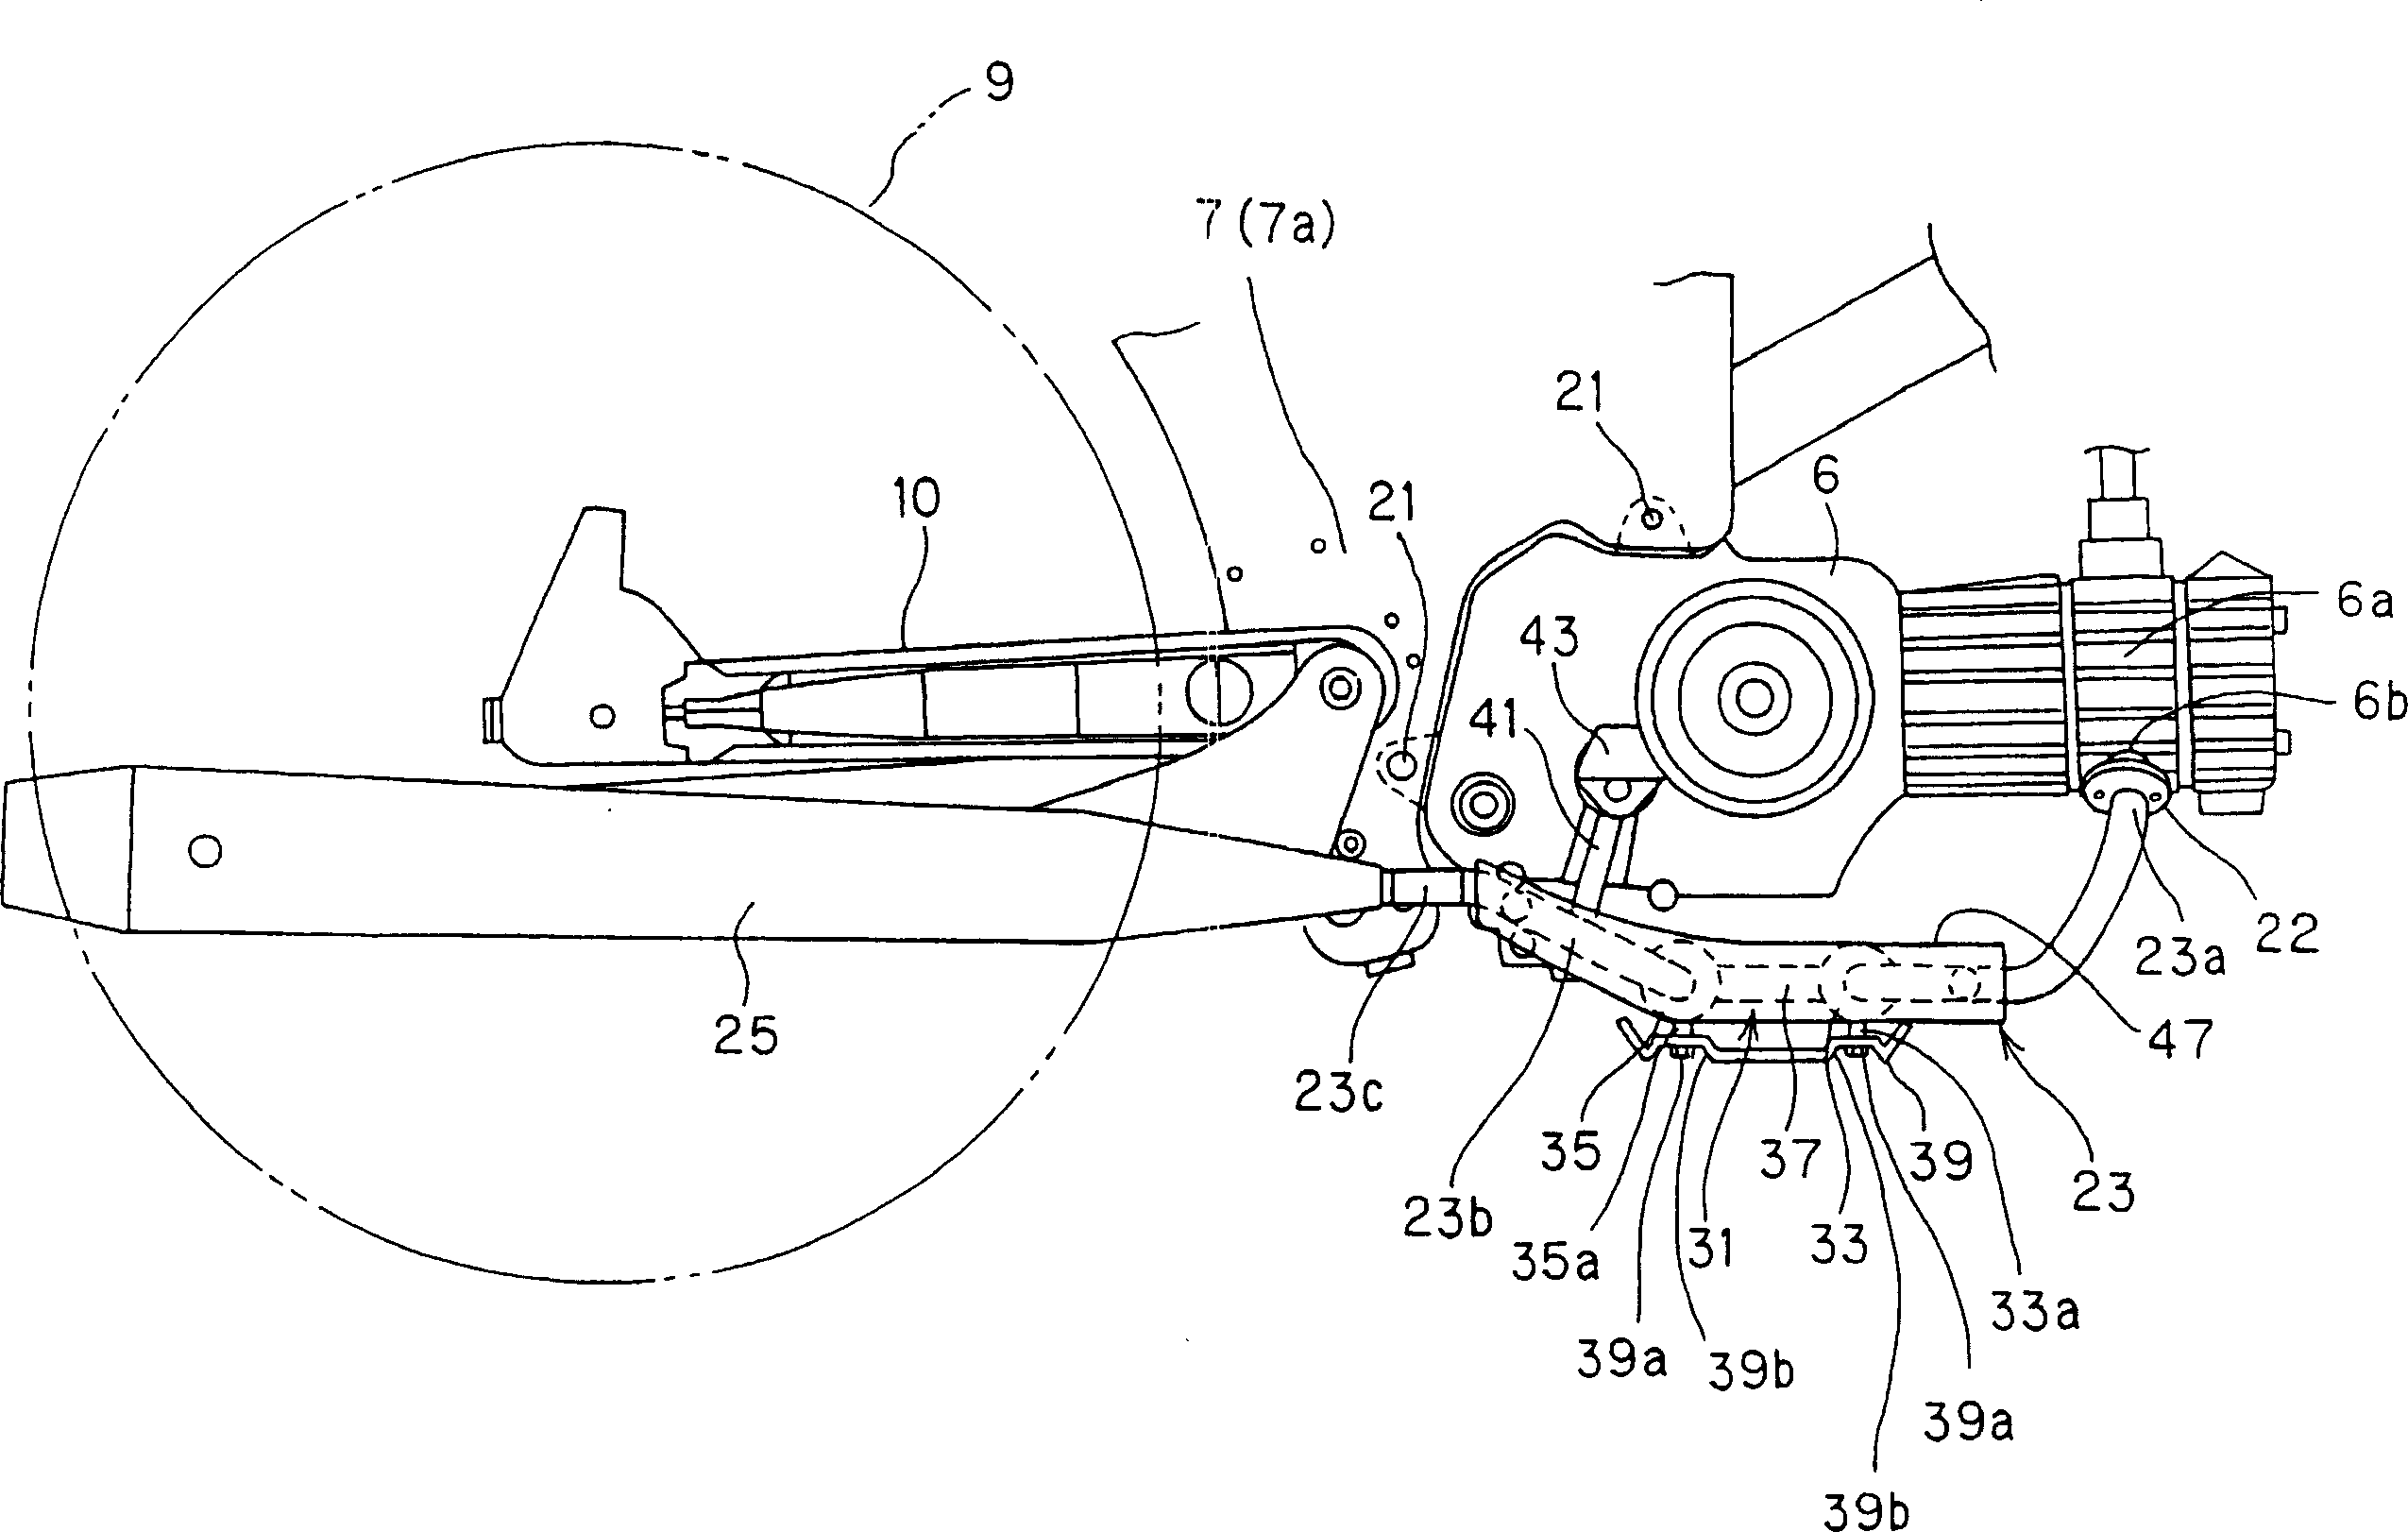 Exhaust apparatus of vehicles